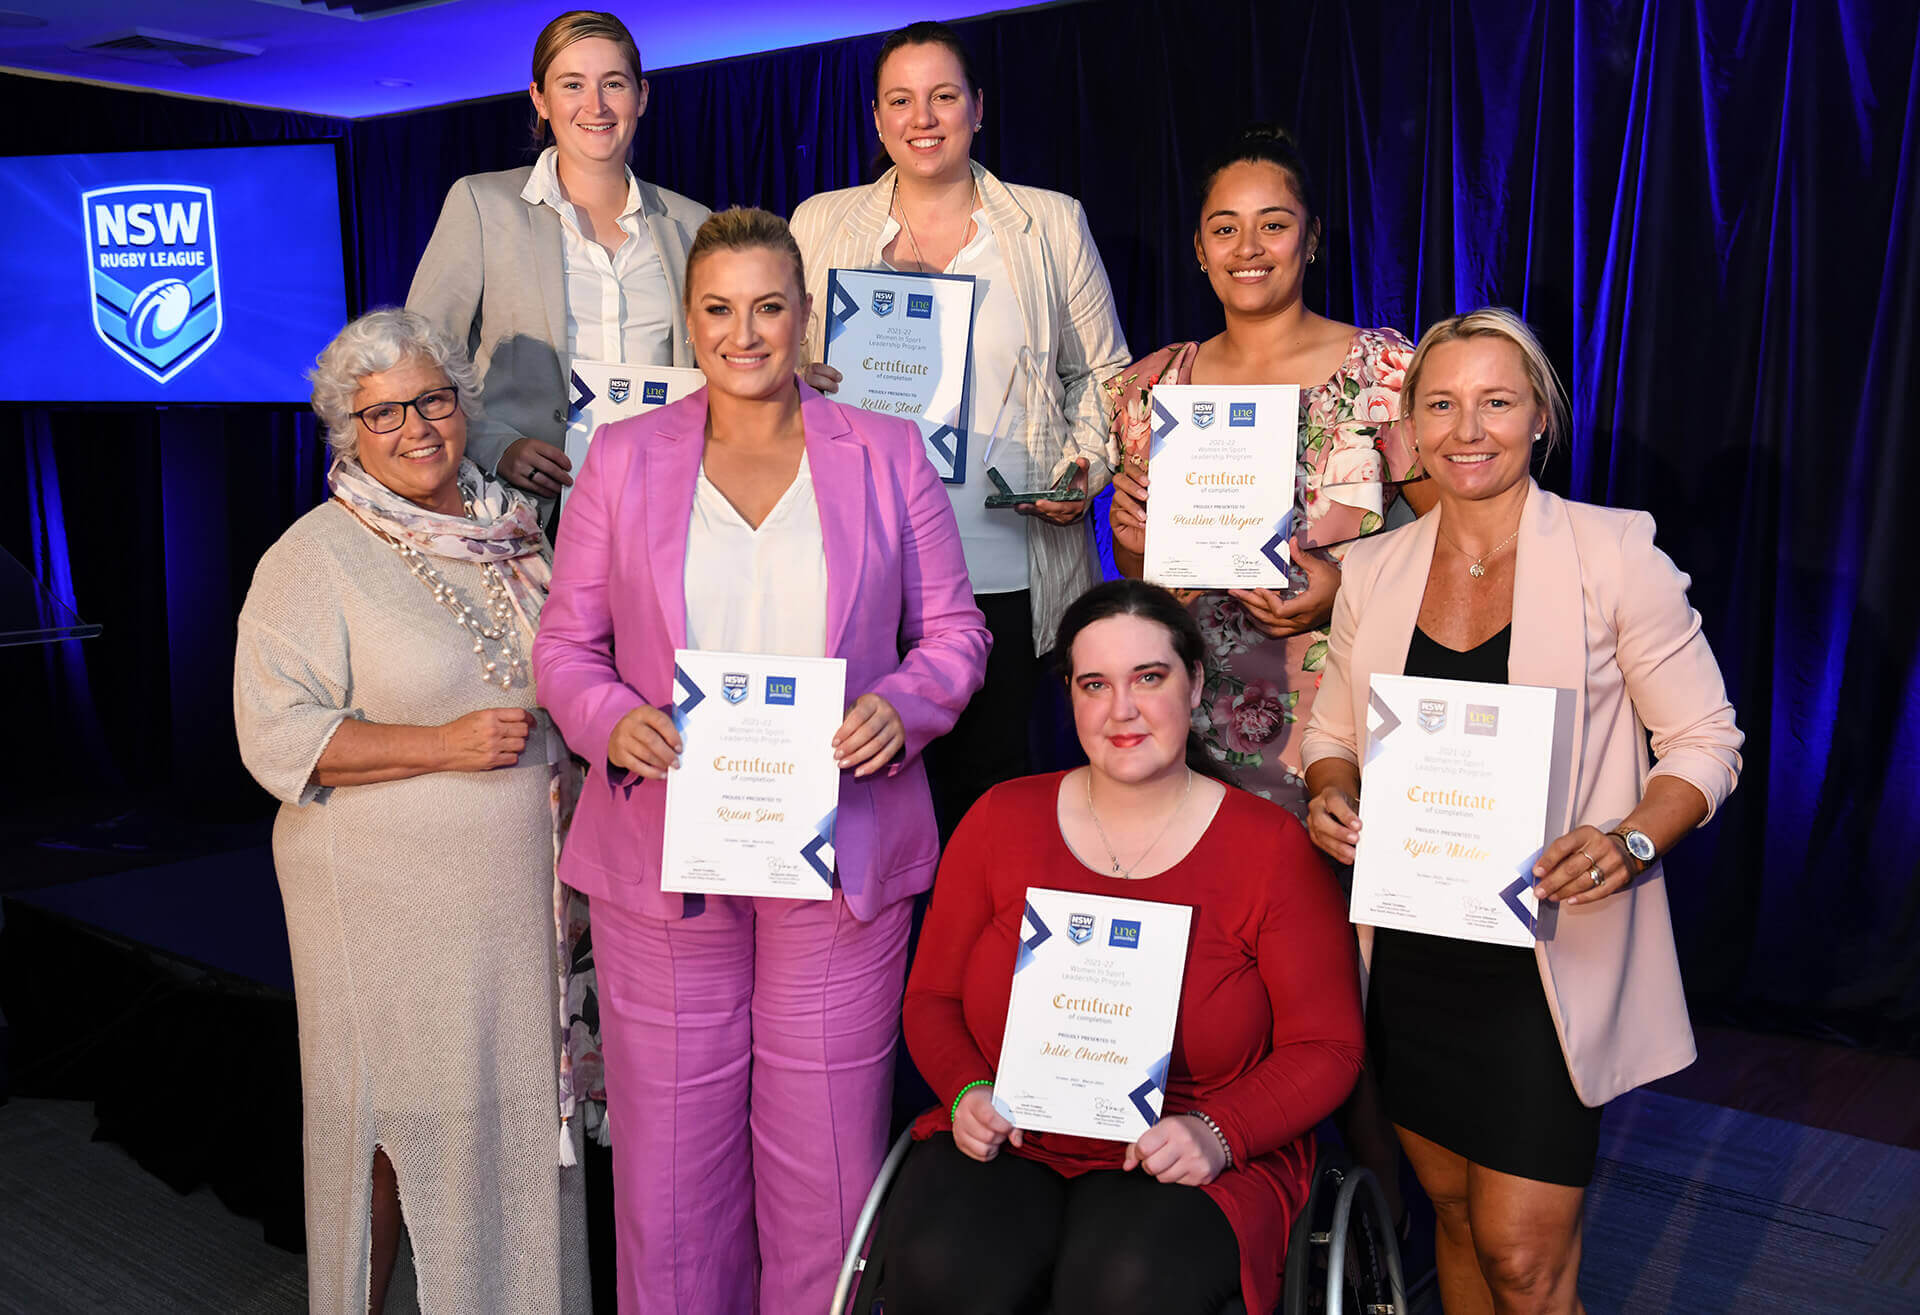 The proud first graduates of the program, with UNE Partnerships’ Jenny Sewell, at the graduation evening on 19 April.